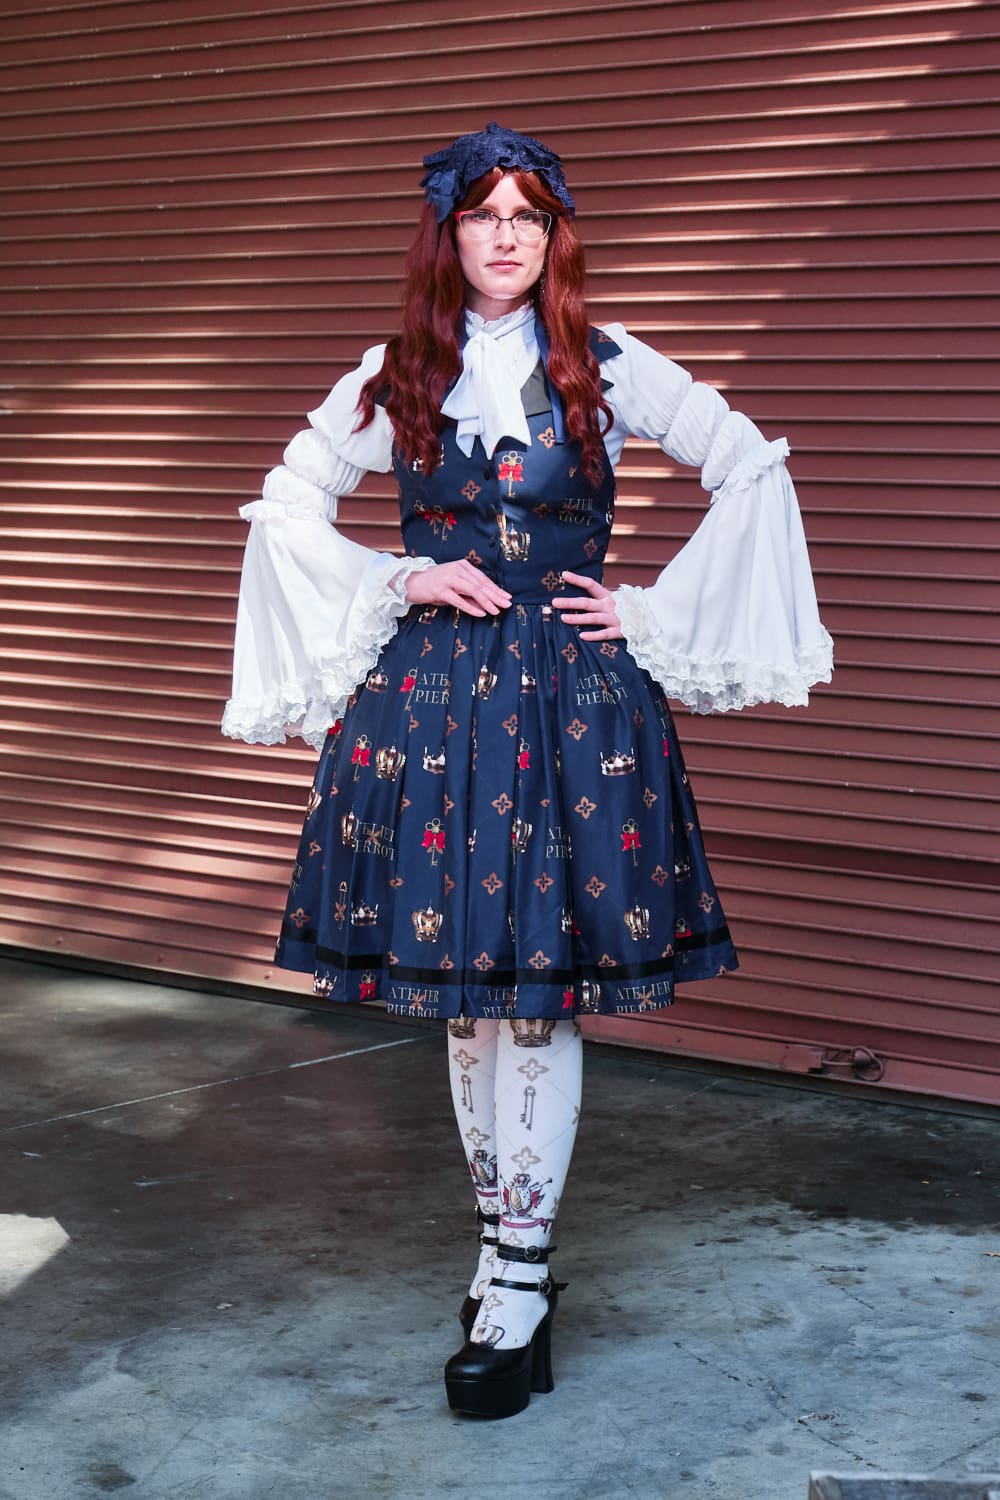 Atelier Pierrot classic lolita model wearing white princess sleeve blouse with crown print vest-style jumperskirt and matching crown tights - full body standing pose 5.